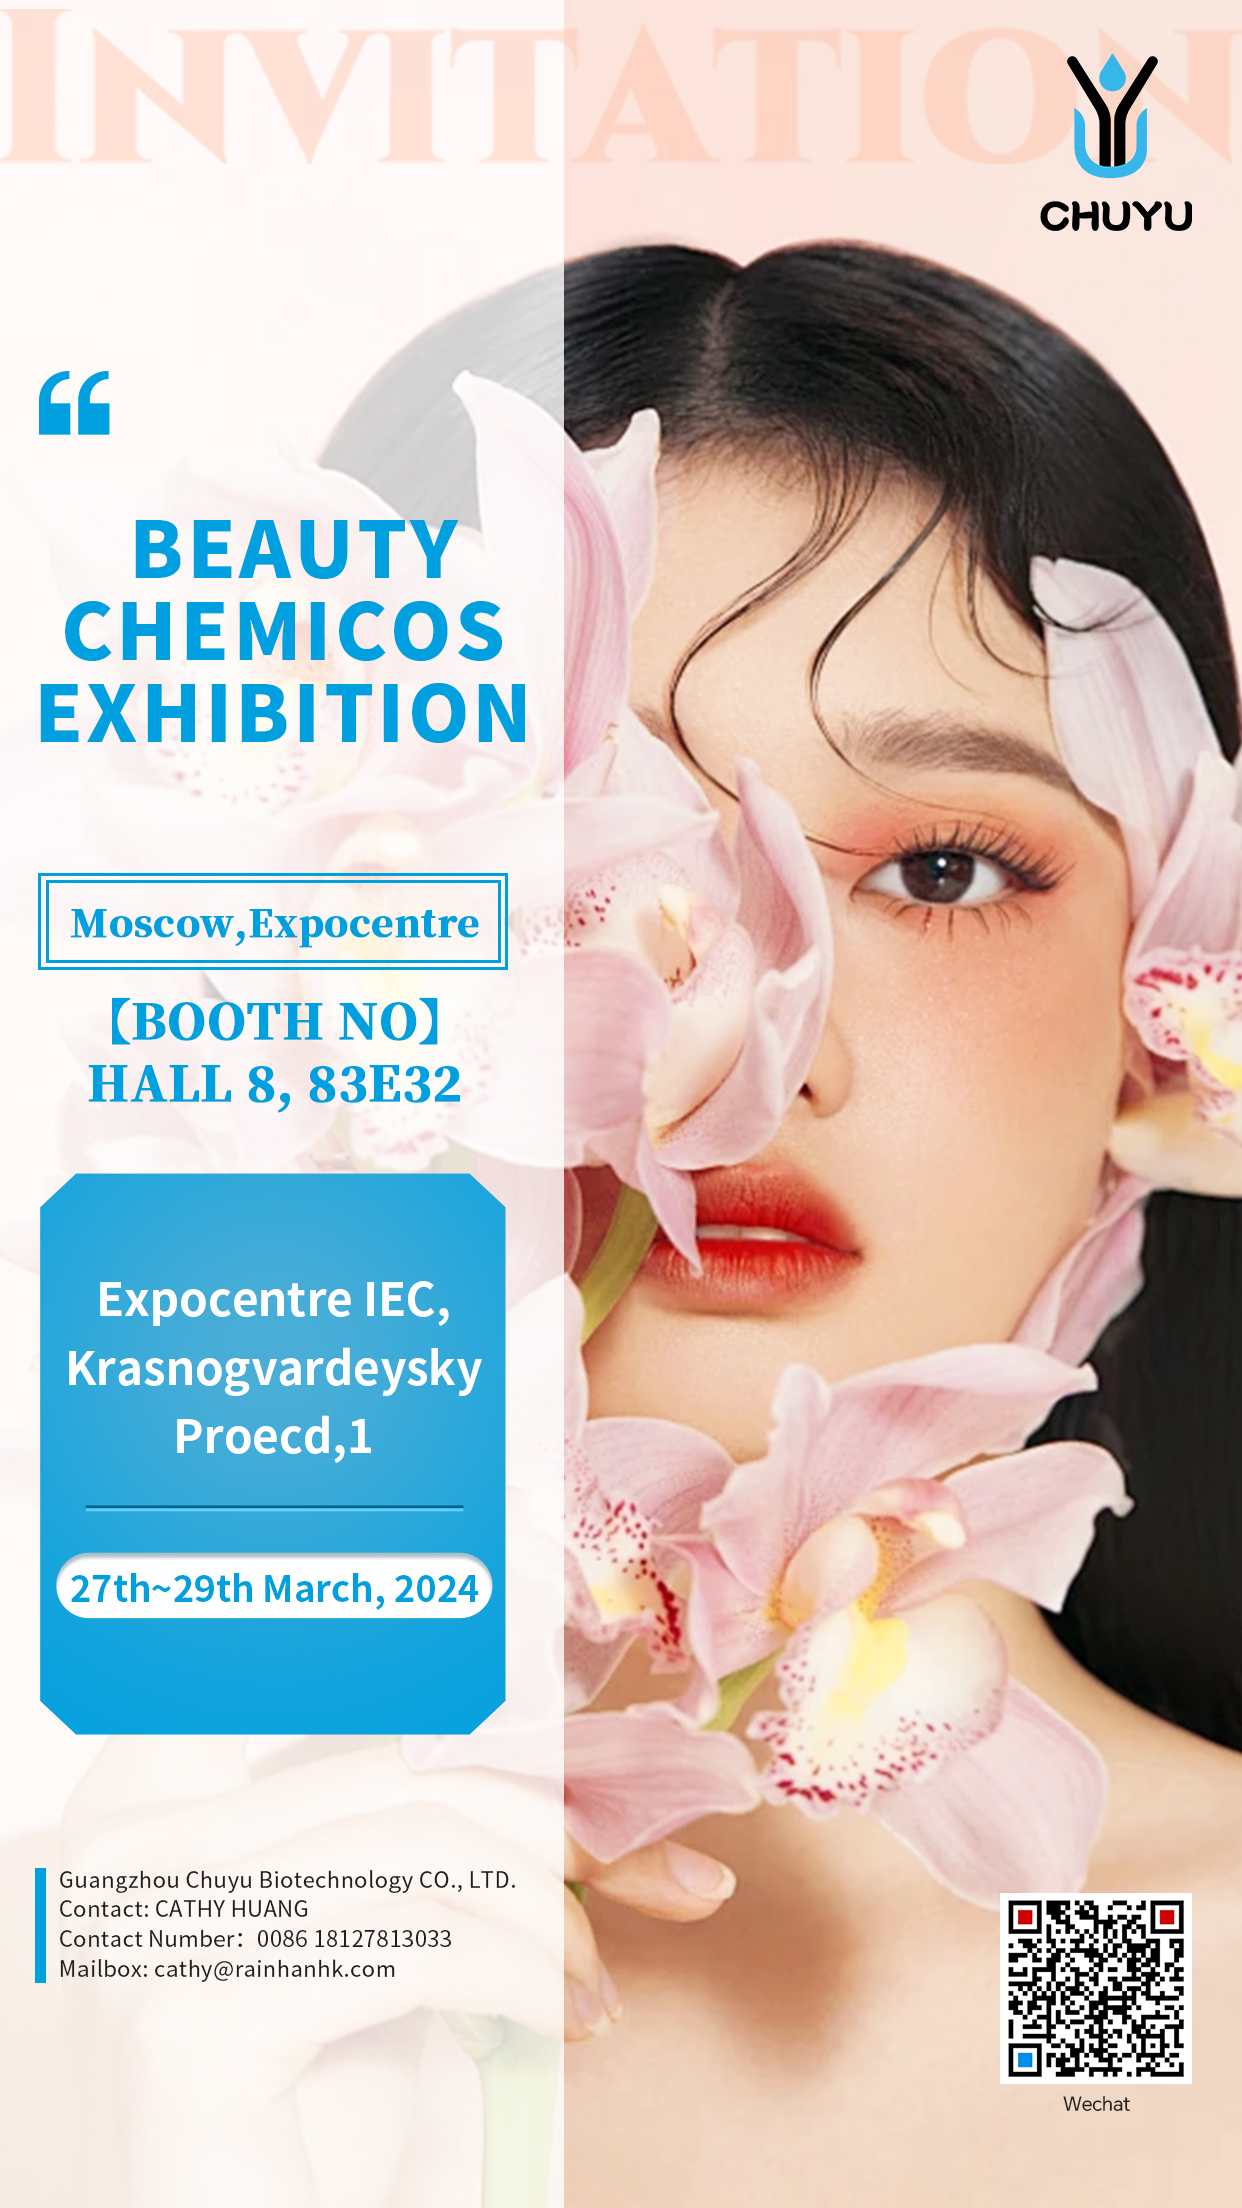 BEAUTY CHEMICOS EXHIBITION IN Moscow,Expocentre